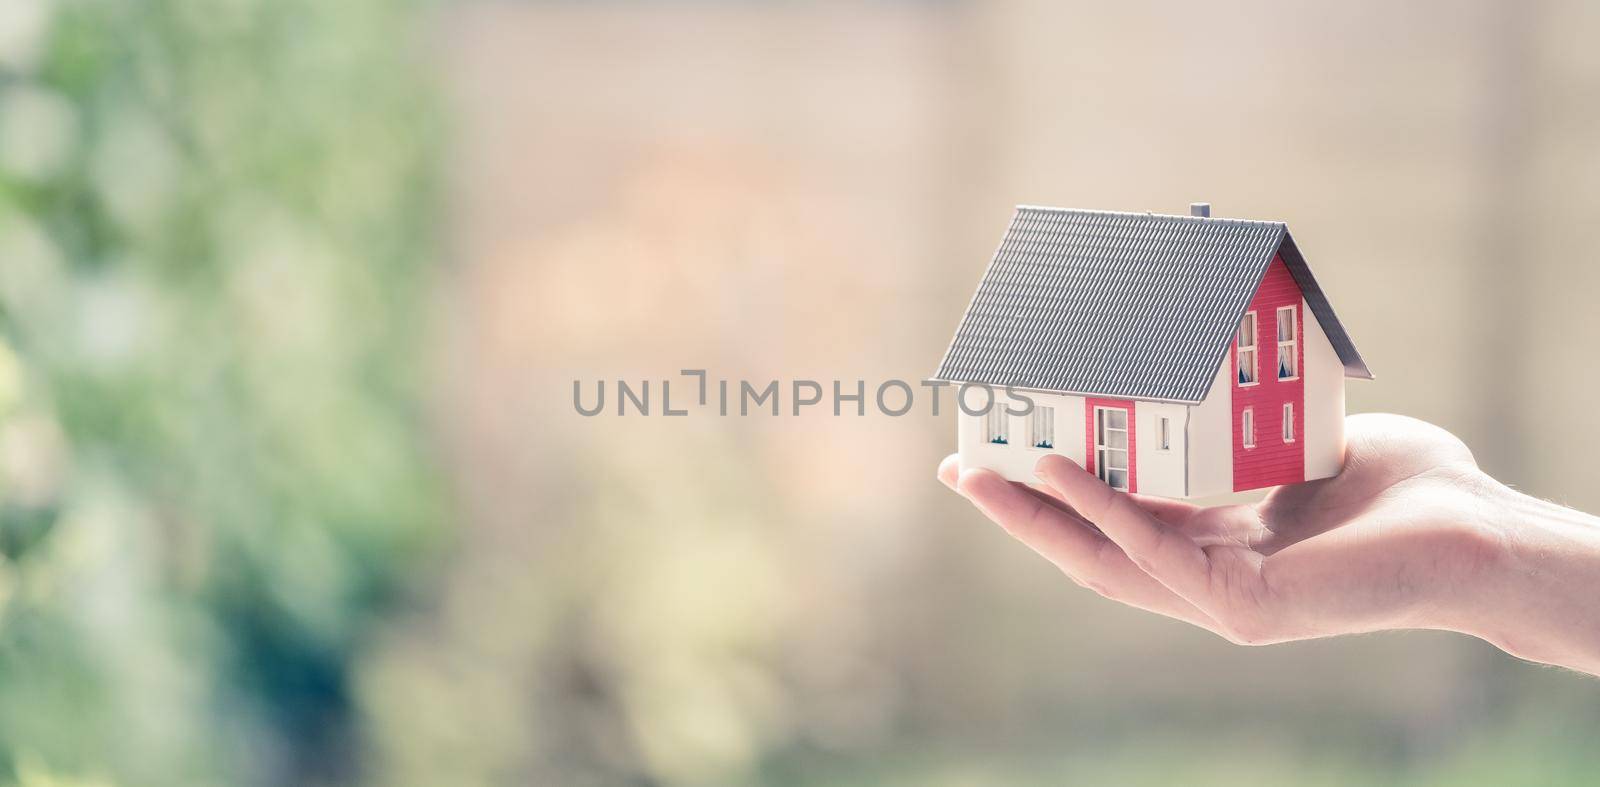 New home and house concept: Red house model outdoors in male hand, copy space